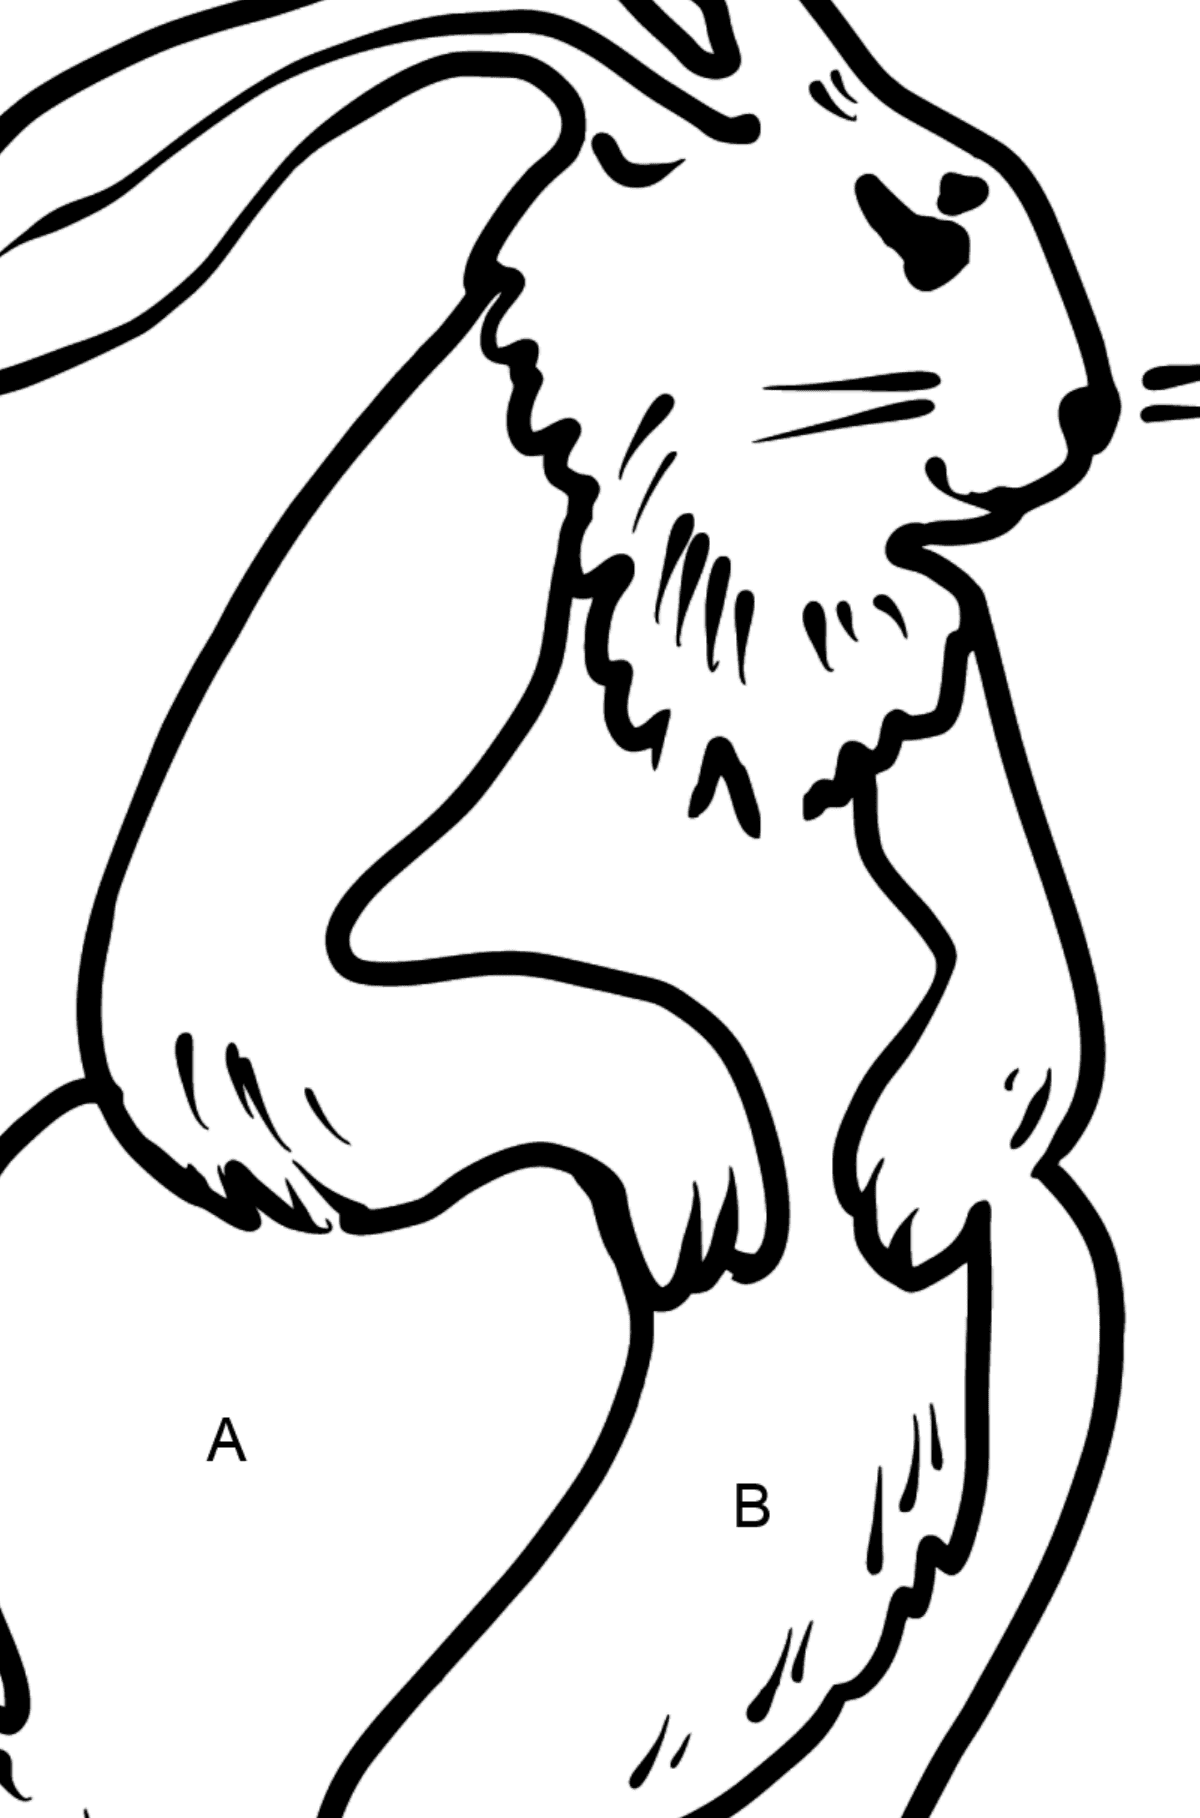 Rabbit coloring page - Coloring by Letters for Kids